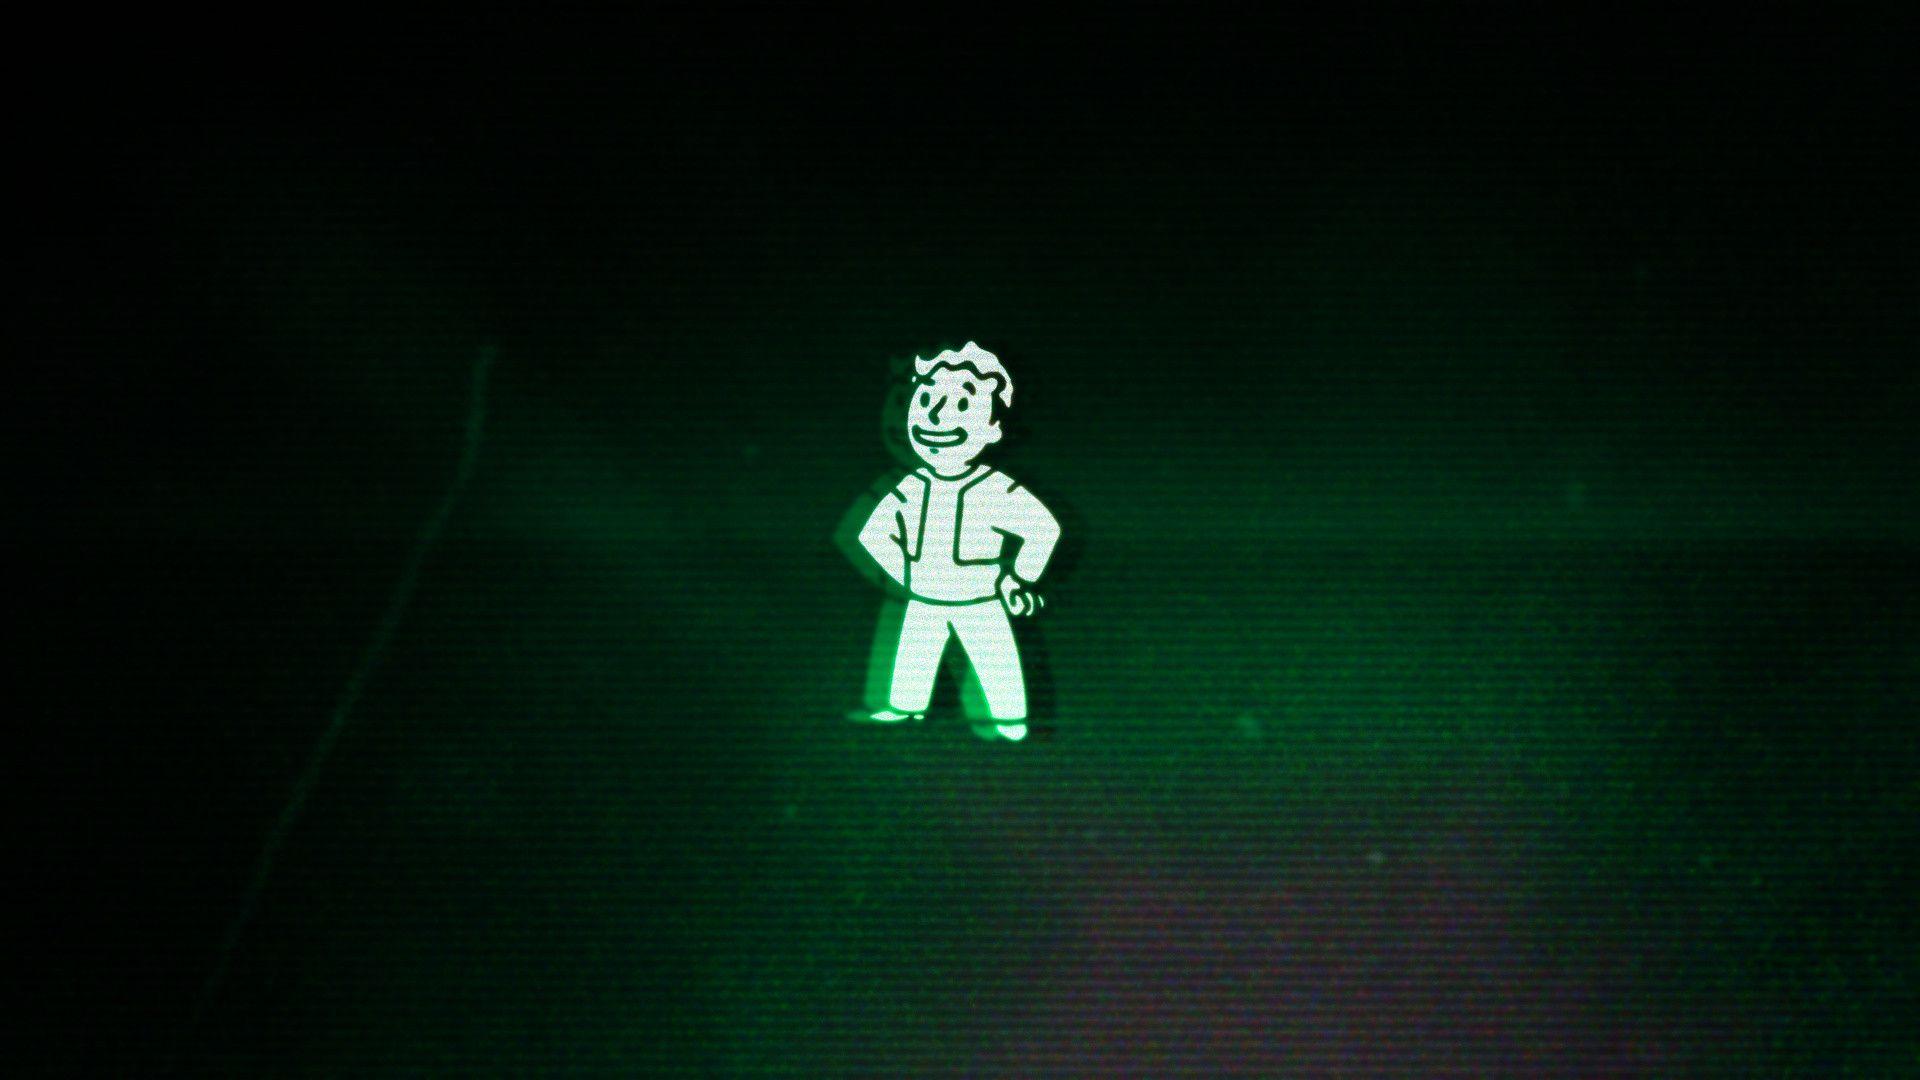 fallout pip boy background Google. Games and Geek